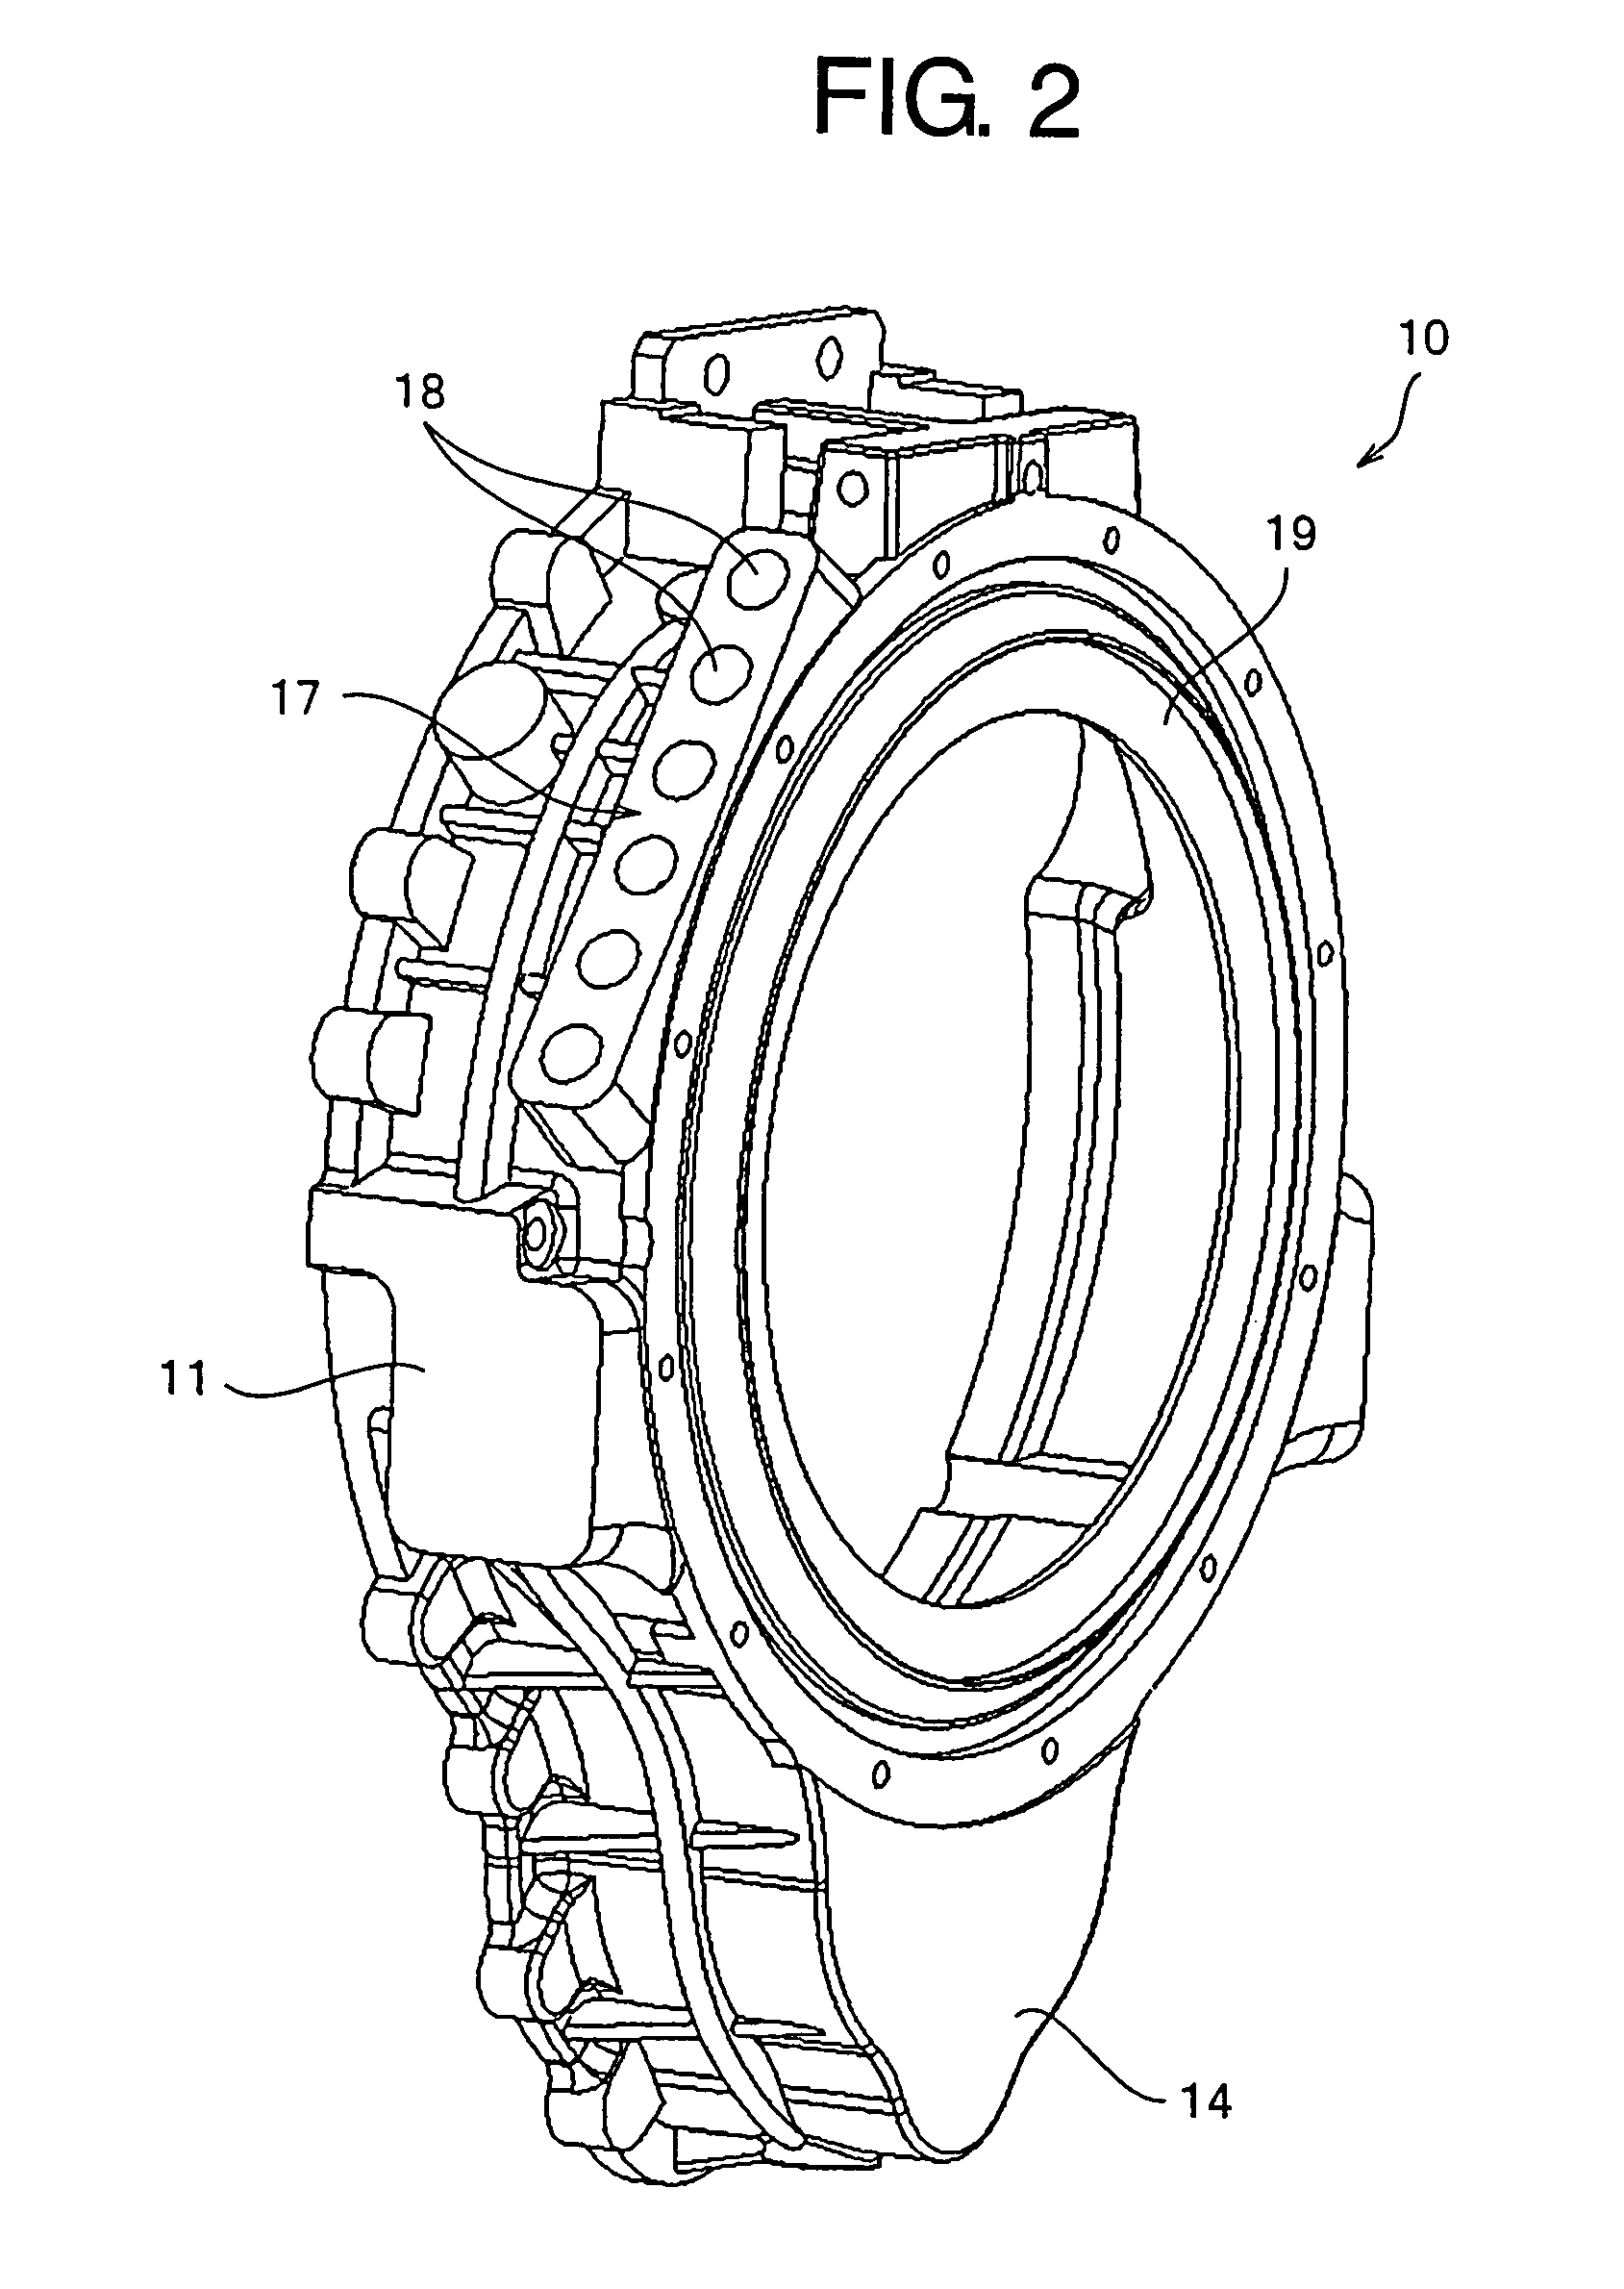 Generator/motor mounted as an auxiliary power unit of an engine